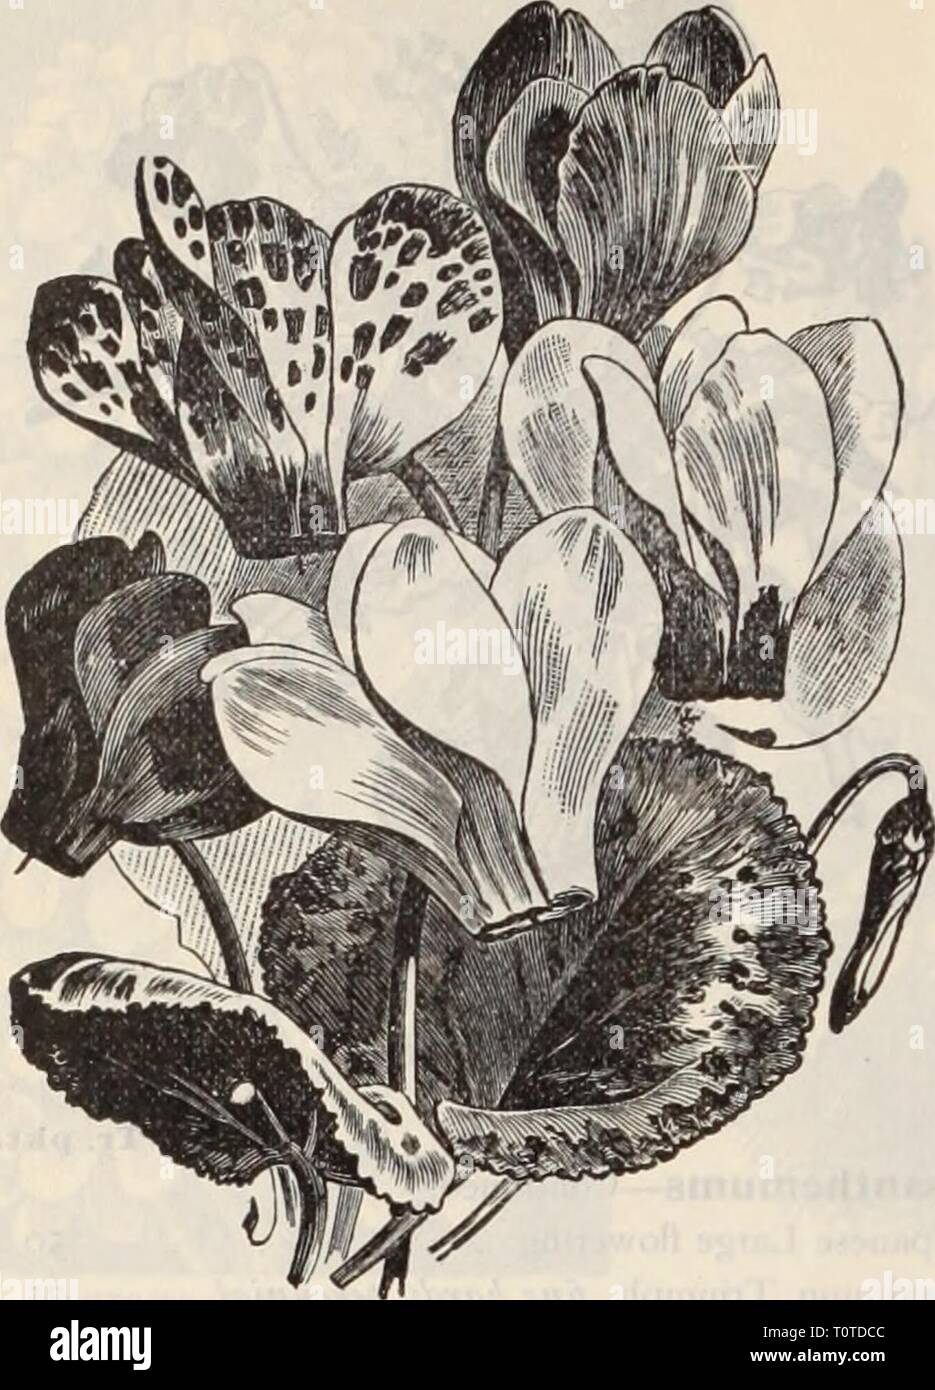 Dreer's wholesale price list  Dreer's wholesale price list / Henry A. Dreer.  dreerswholesalep1898dree Year:   6    Cyclambn Persicom Giganteum. Tr. pkt. Oz. Cyclamen persicum, finest mixed 30 I 25 Papilio (new Butterfly Cyclamen) . . . . 35 100 1000 seeds, seeds. per. giganteum, pure while 75 6 00 ' ' white with cannine eye ... 75 6 00 ' ' rose 75 6 00 ' ' blood red 75 6 00 ' ' mixed 60 5 00 ' ' double flowering, 25 cts. per pkt. Dahlia, Large flg., double mixed 25 I 00 Small flg. (pompone) double mixed .... 25 I 00 [ Cactus, double mixed 30 I 50 Single striped mixed {^gracilis') 15 5° ' mixe Stock Photo